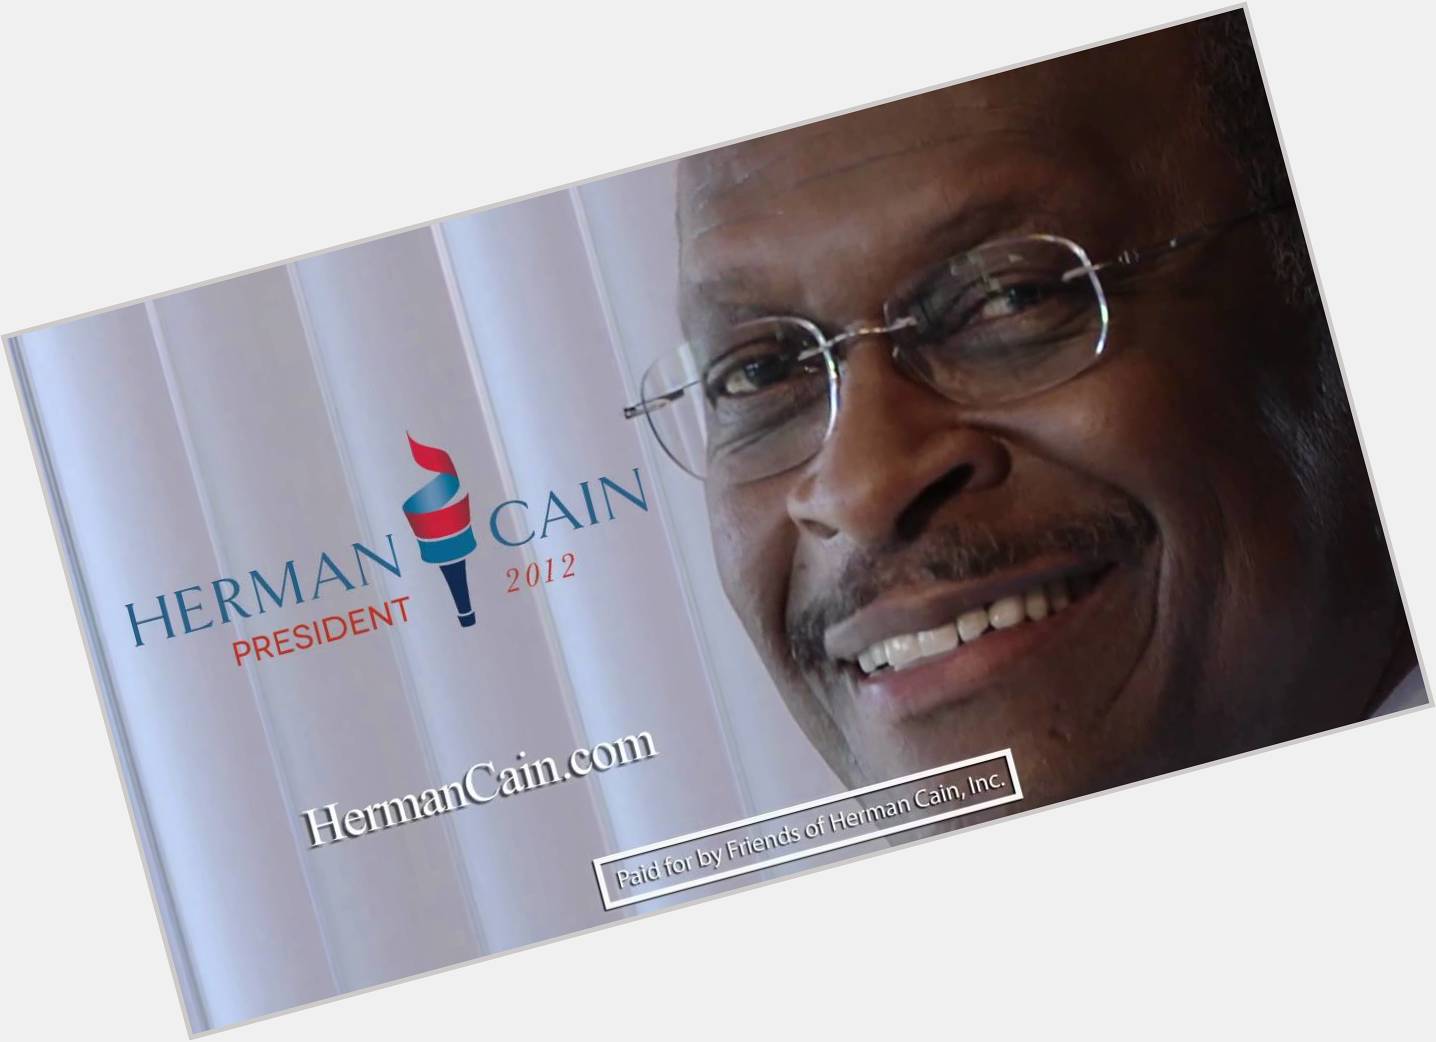 <a href="/hot-men/herman-cain/where-dating-news-photos">Herman Cain</a> Average body,  salt and pepper hair & hairstyles